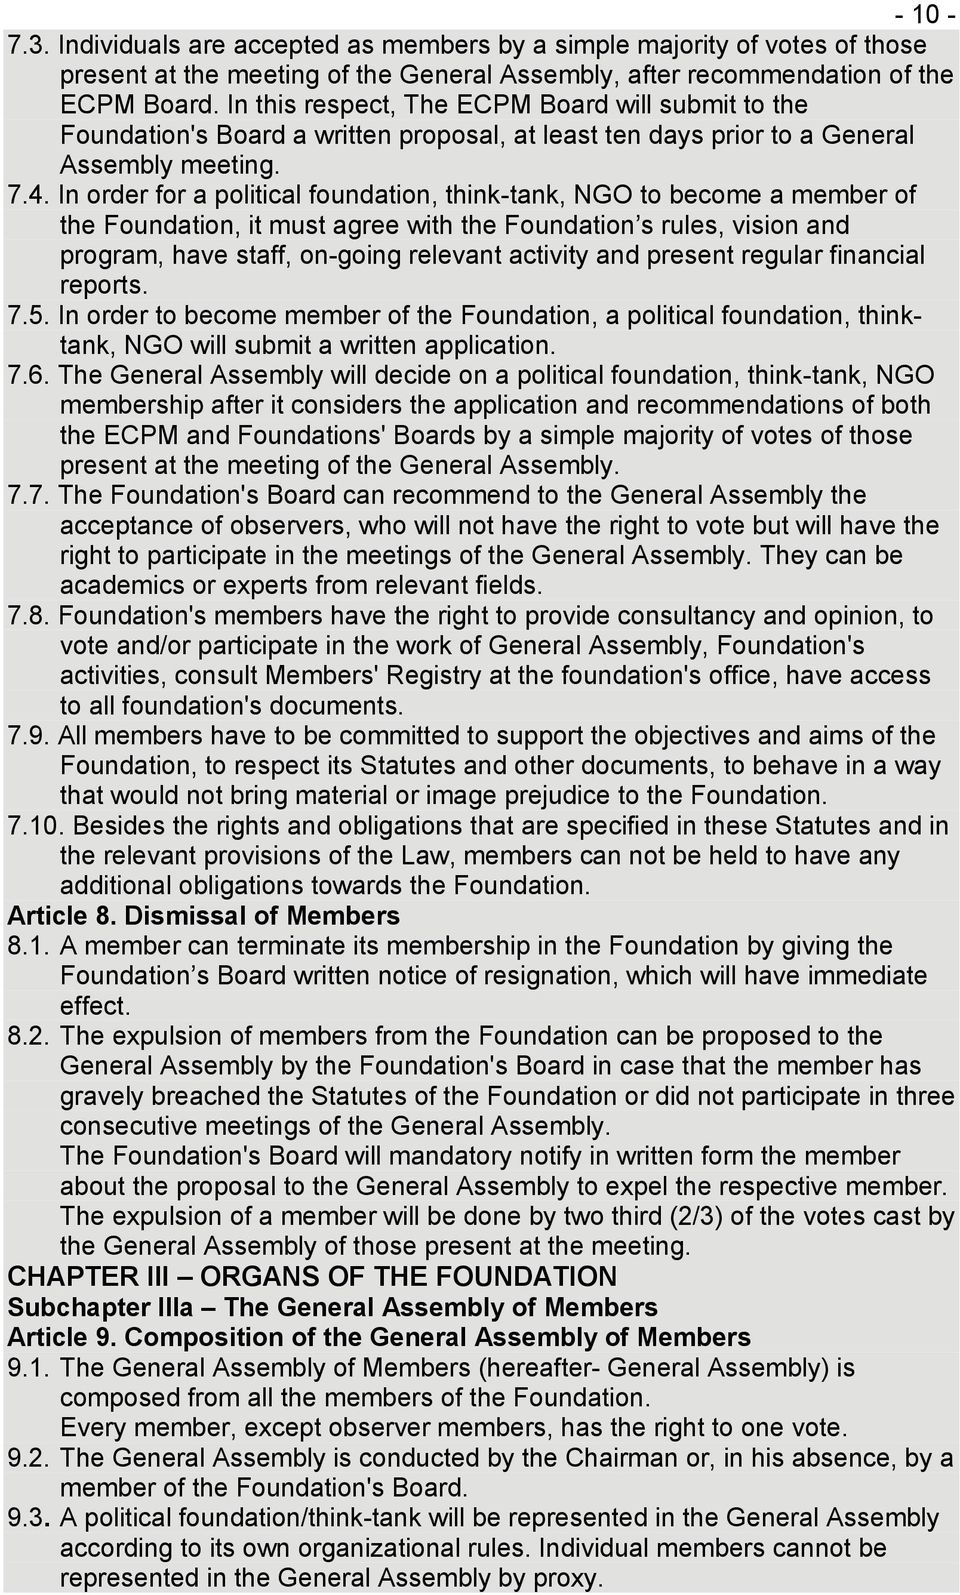 In order for a political foundation, think-tank, NGO to become a member of the Foundation, it must agree with the Foundation s rules, vision and program, have staff, on-going relevant activity and